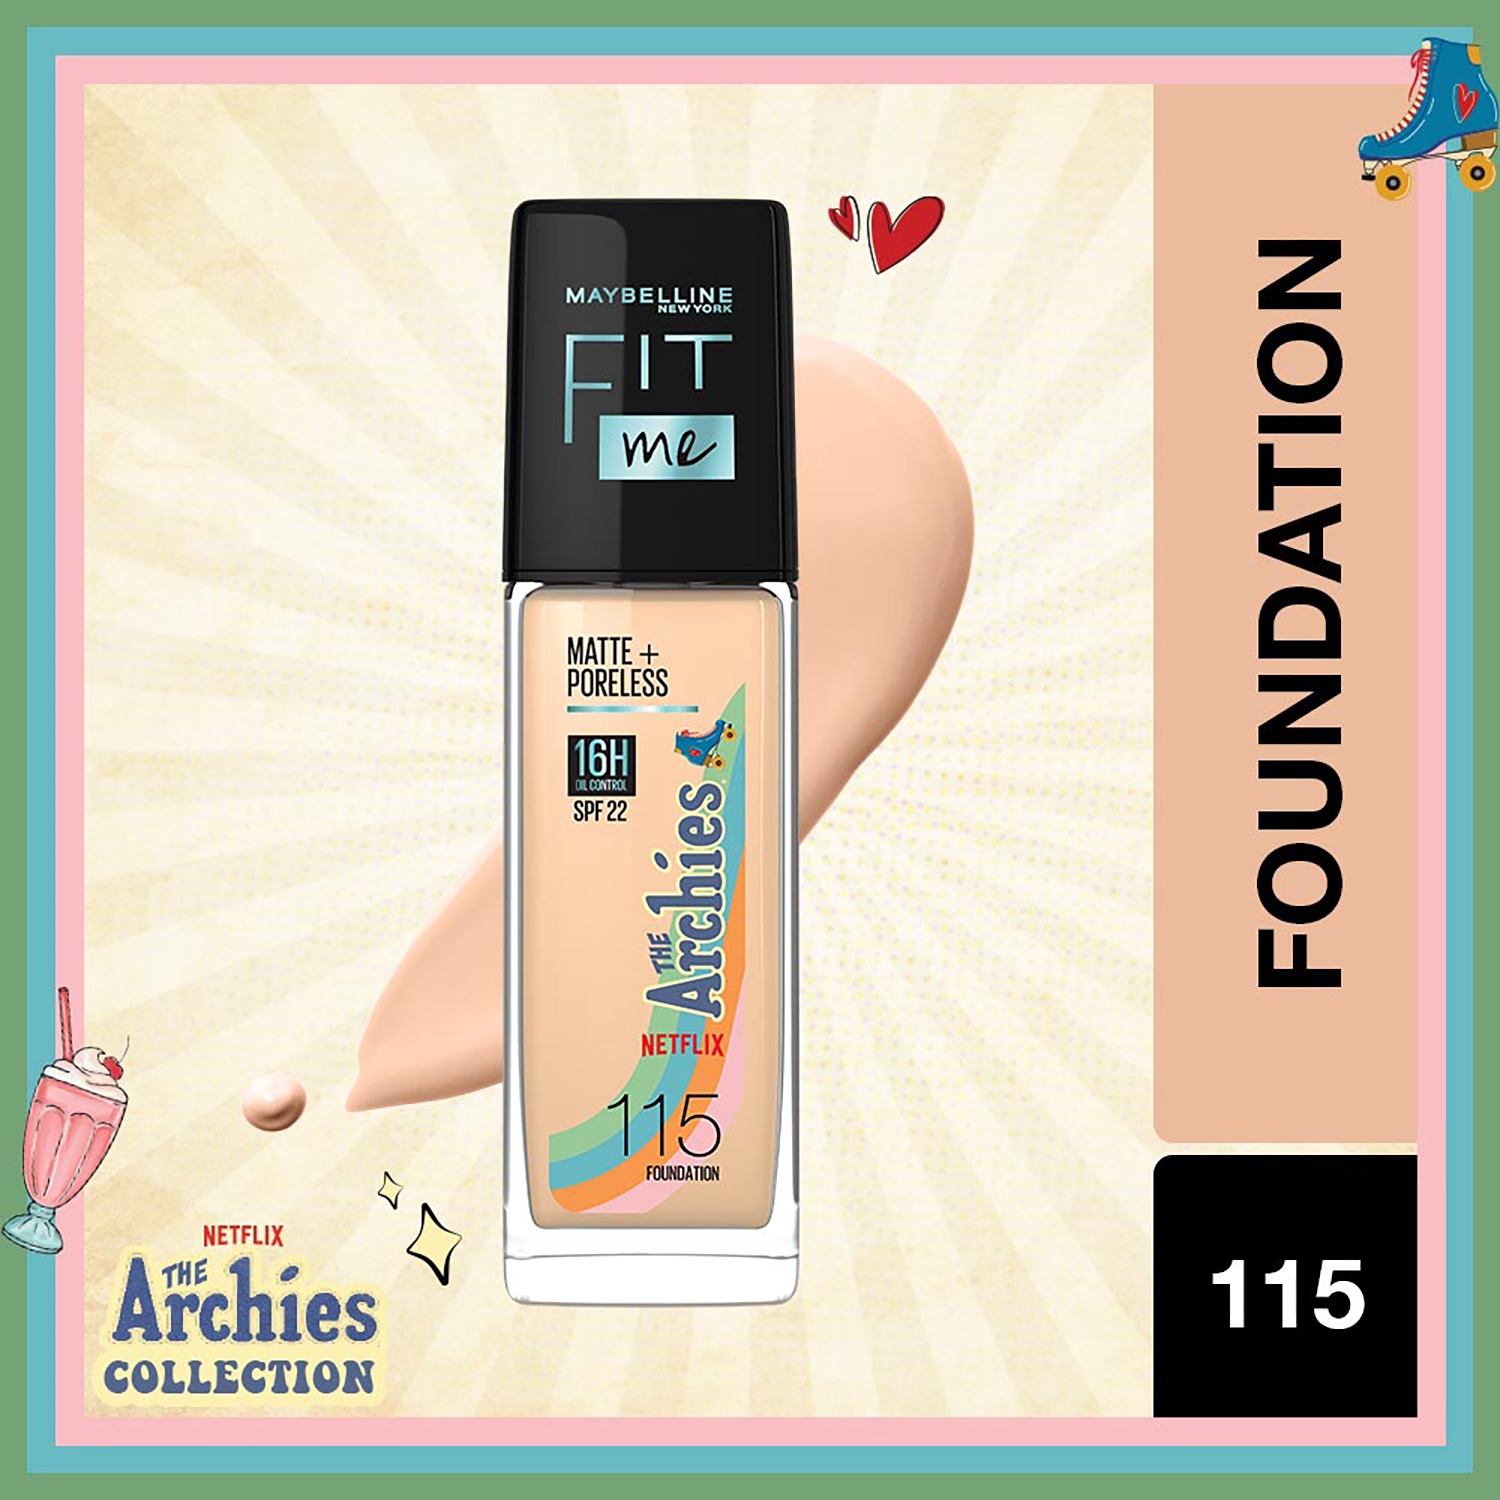 Maybelline NY Fit Me The Archies - Collection Foundation (30ml) Matte+Poreless 115